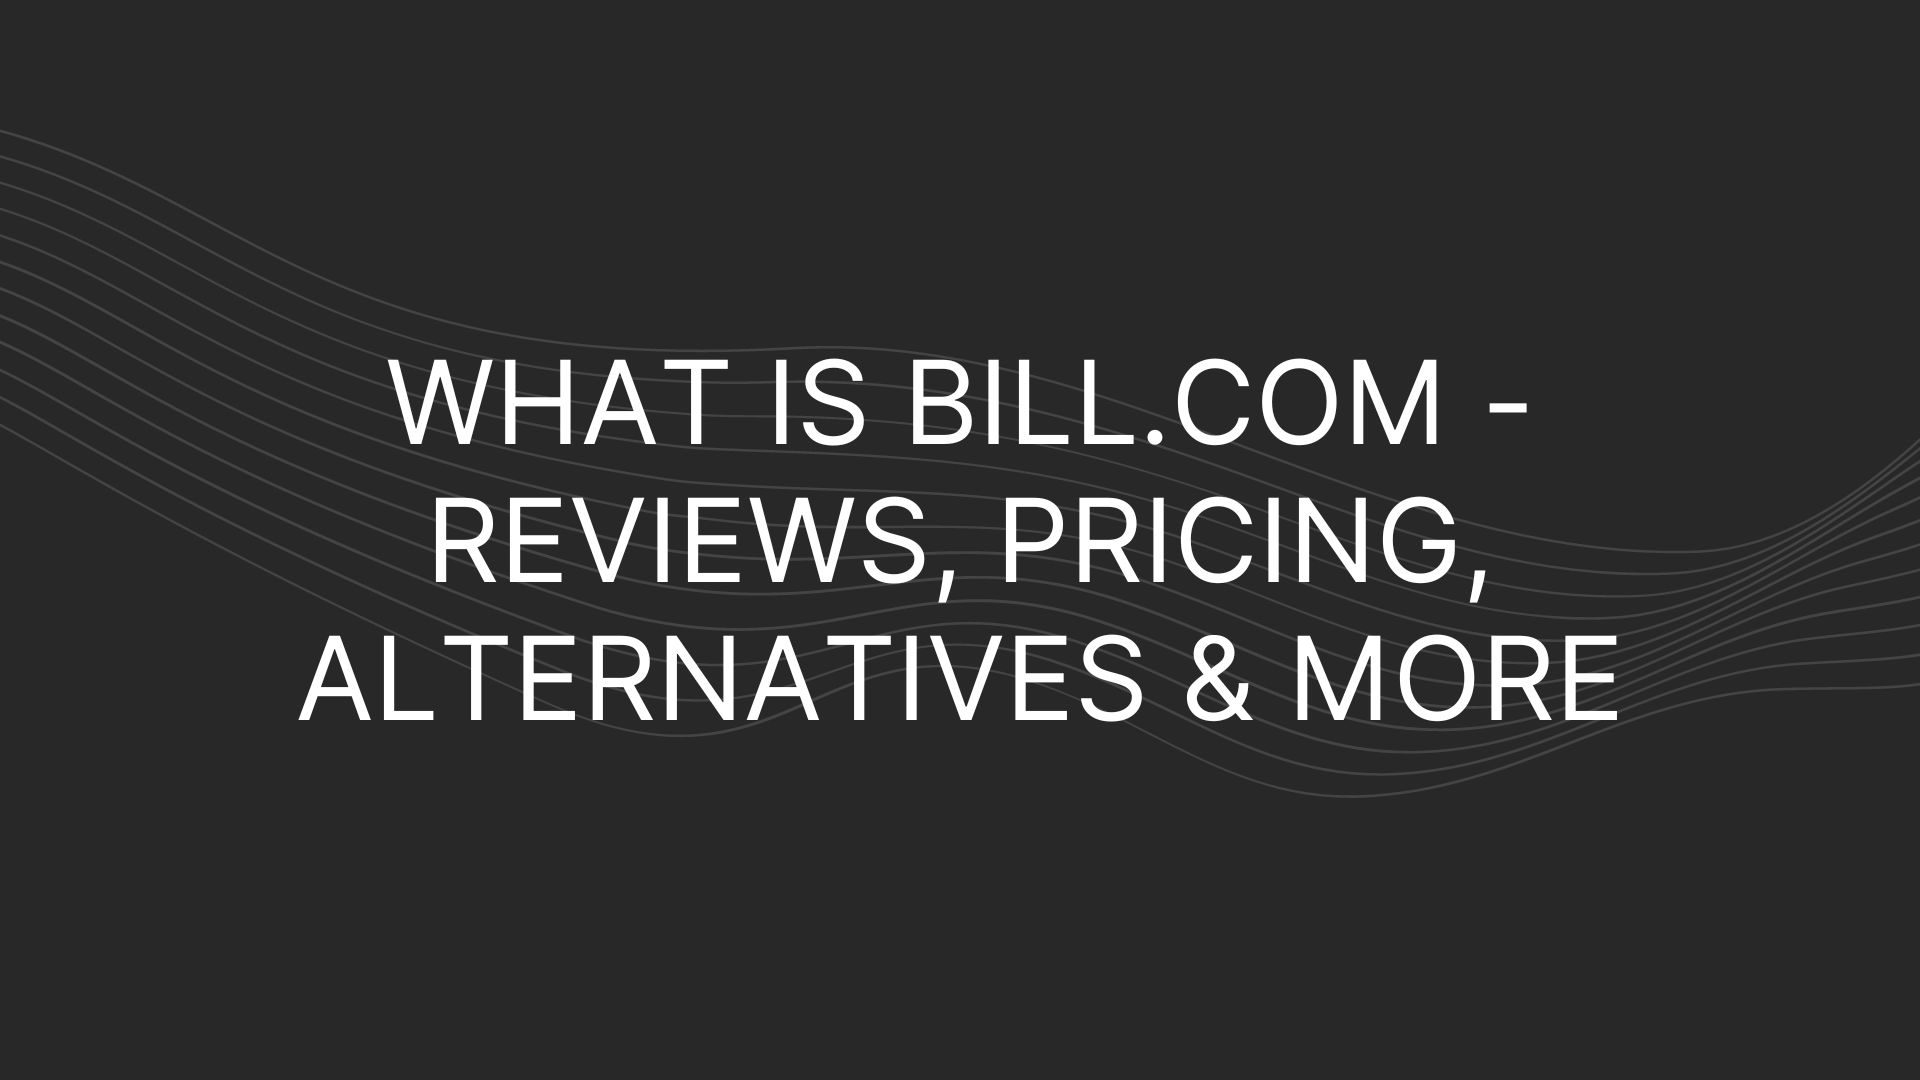 What is Bill.com – Reviews, Pricing, Alternatives & More